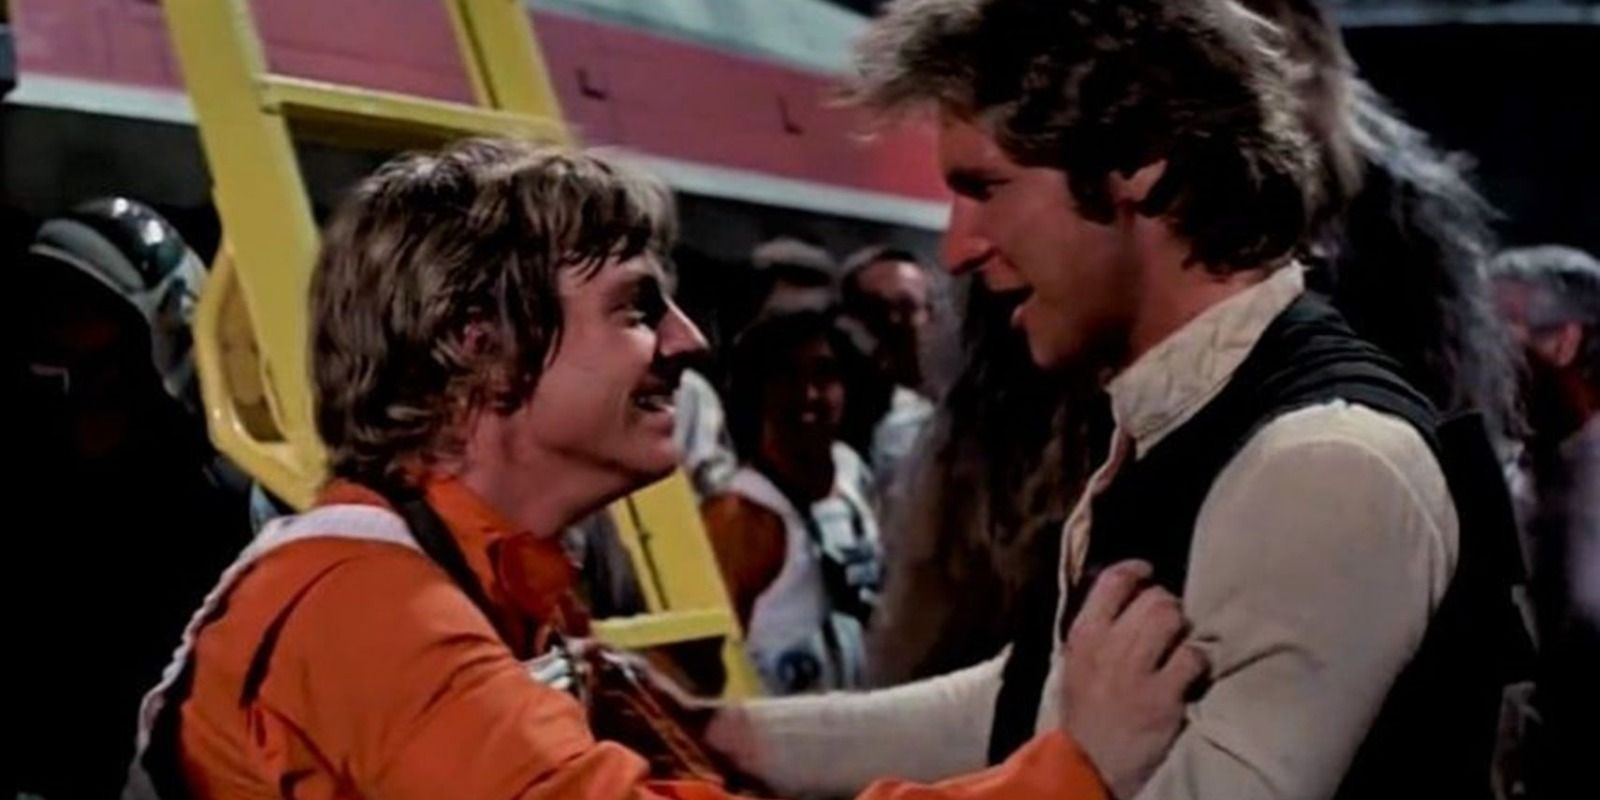 Luke Skywalker and Han Solo celebrate destroying the death Star in A New Hope